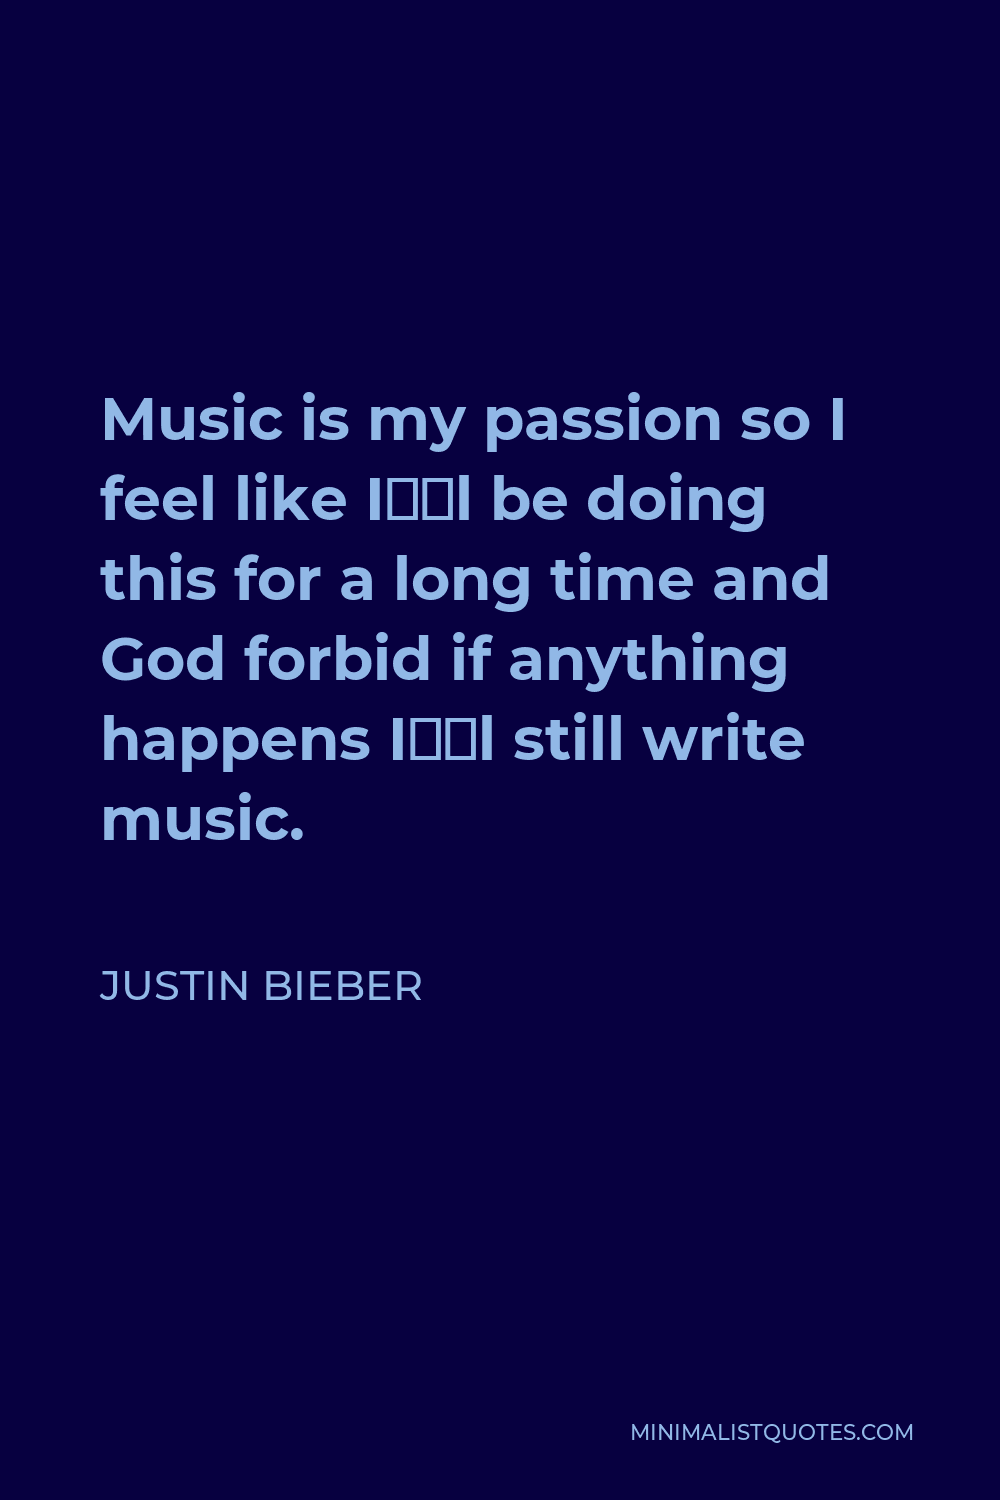 Justin Bieber Quote - Music is my passion so I feel like I’ll be doing this for a long time and God forbid if anything happens I’ll still write music.